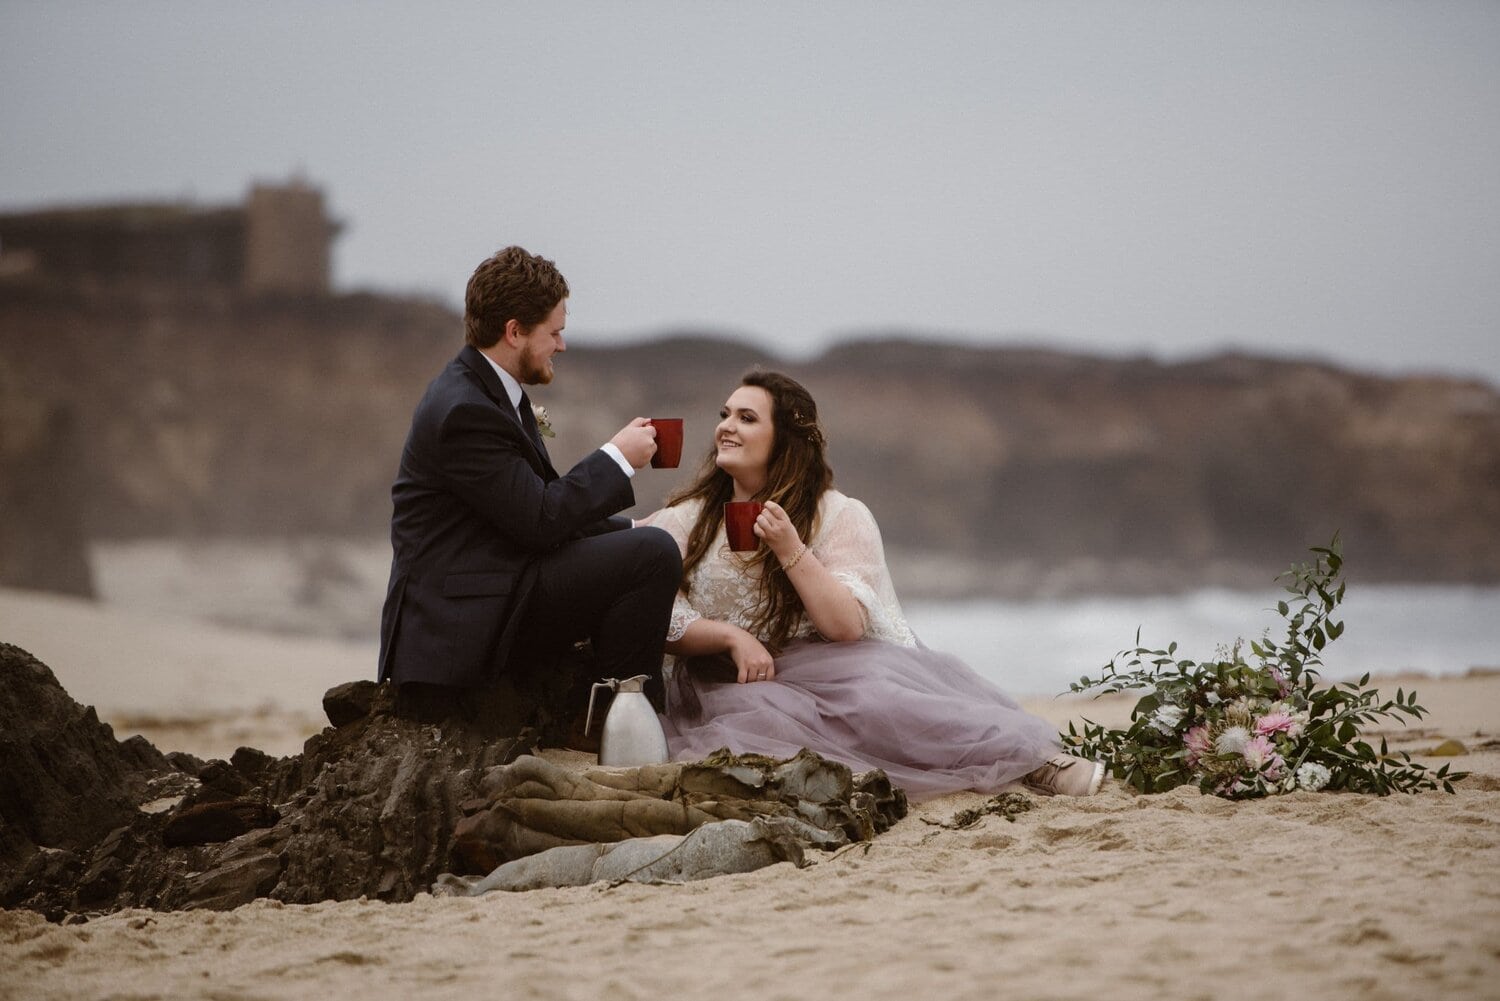 Bride and groom sitting on the beach at sunrise and drink coffee, in Big Sur, California.